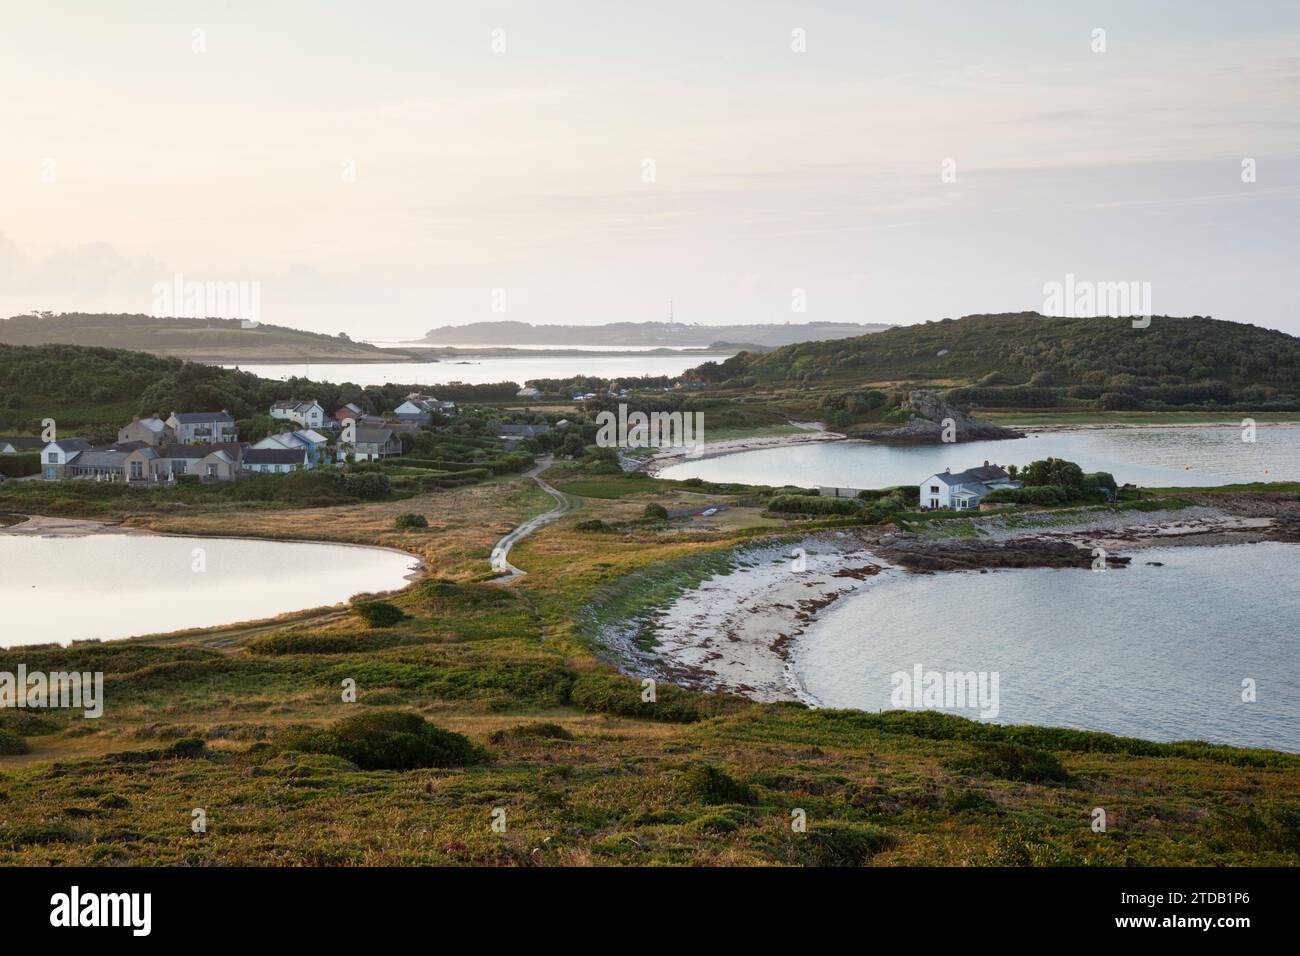 Bryher. Isles of Scilly, Cornwall, UK. Stock Photo